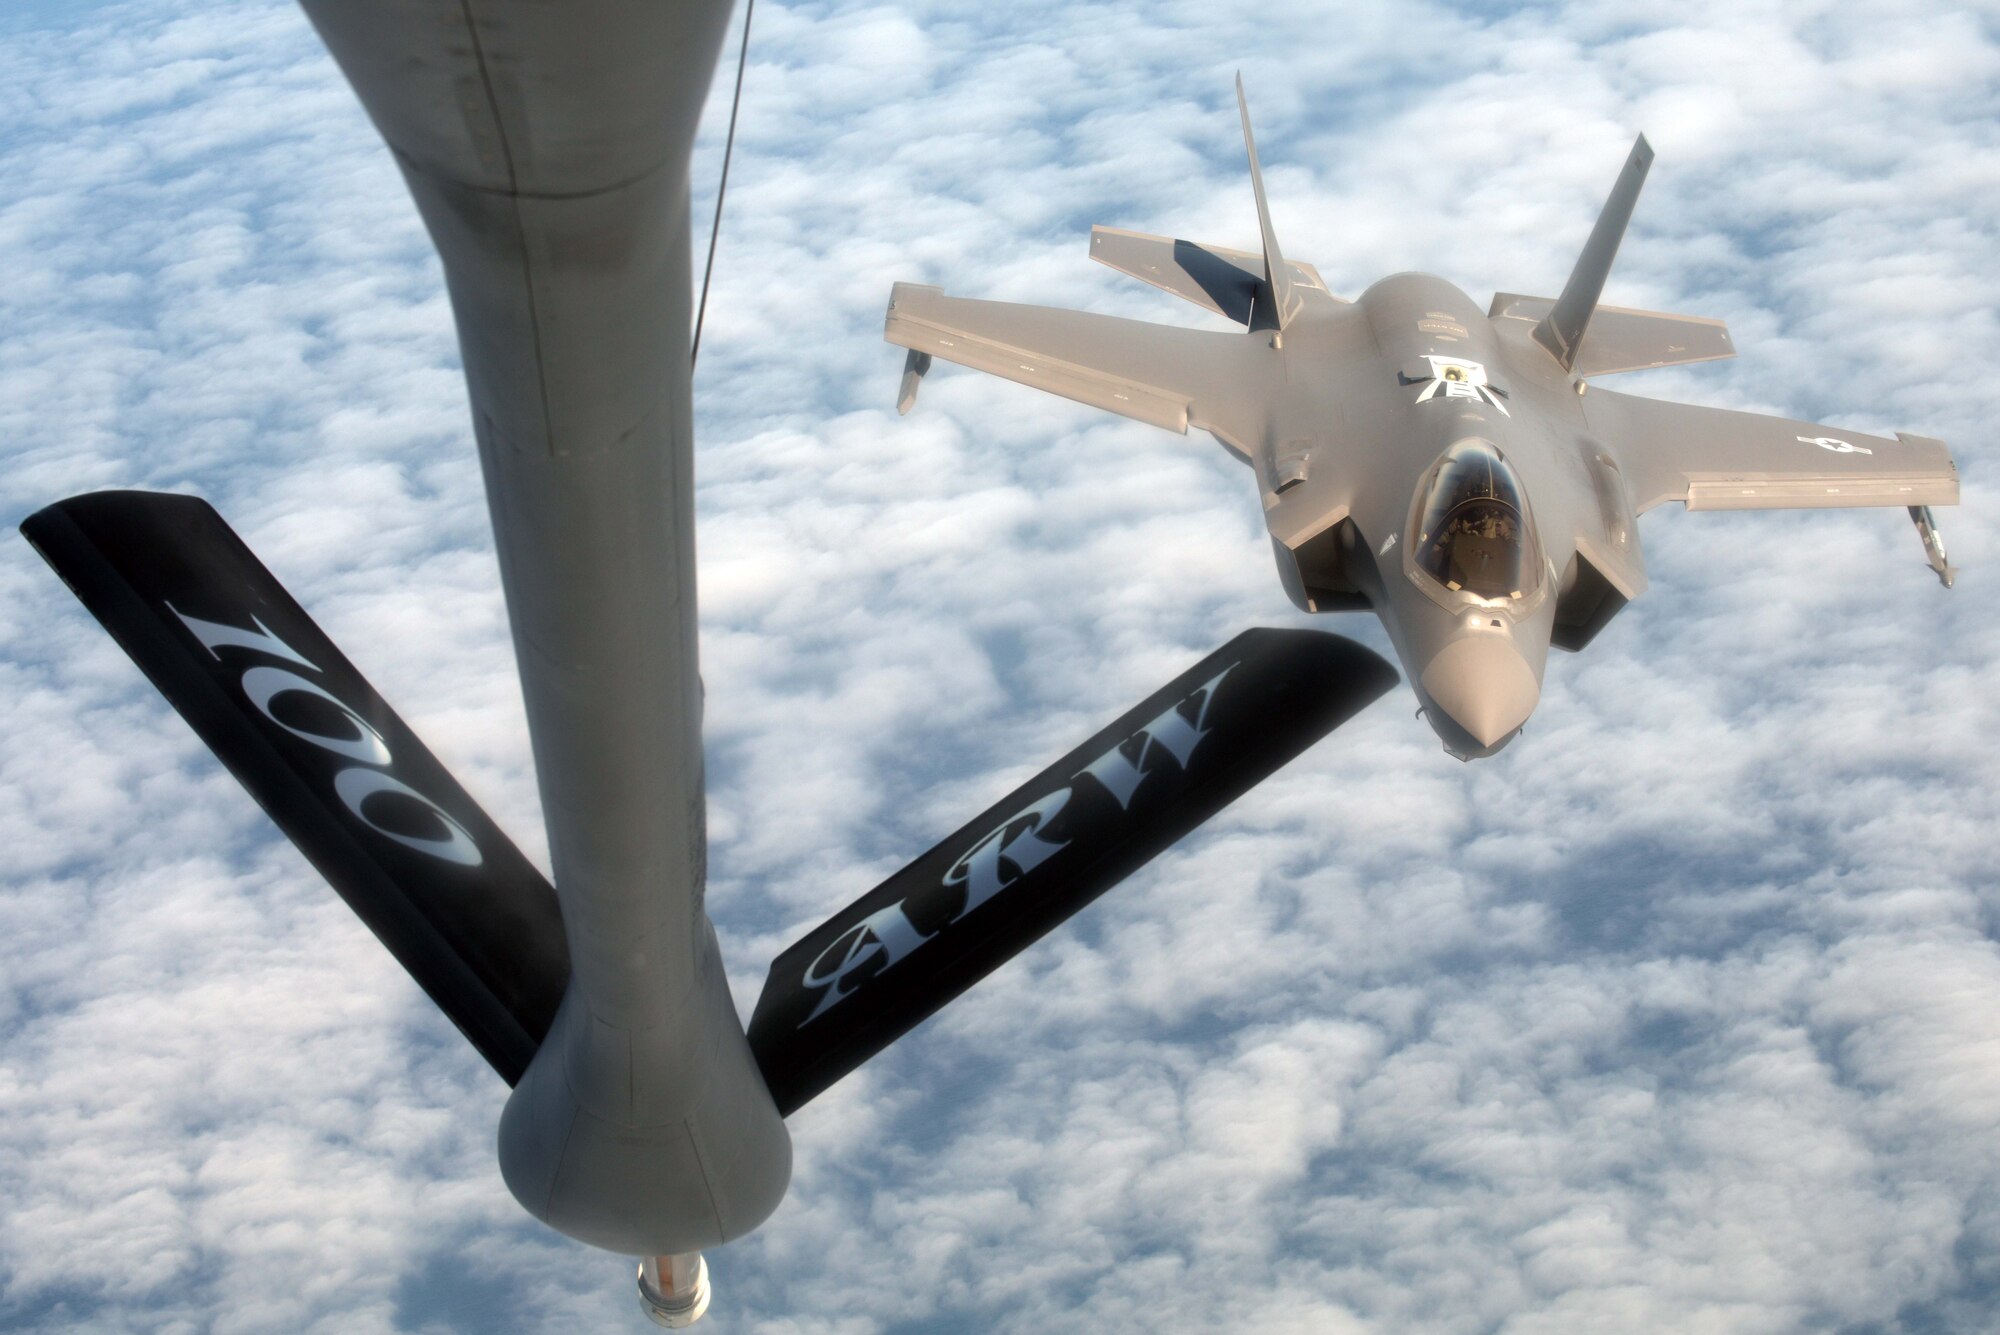 A U.S. Air Force F-35A Lightning II, assigned to the 388th Fighter Wing, prepares to receive fuel from a U.S. Air Force KC-135 Stratotanker, assigned to RAF Mildenhall, England, during Exercise Point Blank over the North Sea, June 27, 2019. Approximately 52 aircraft from three nations, U.S., France and the UK, participated in Exercise Point Blank. This exercise was a perfect opportunity for aircraft to train alongside other types of allied aircraft in a realistic training environment. (U.S. Air Force photo by Senior Airman Benjamin Cooper)